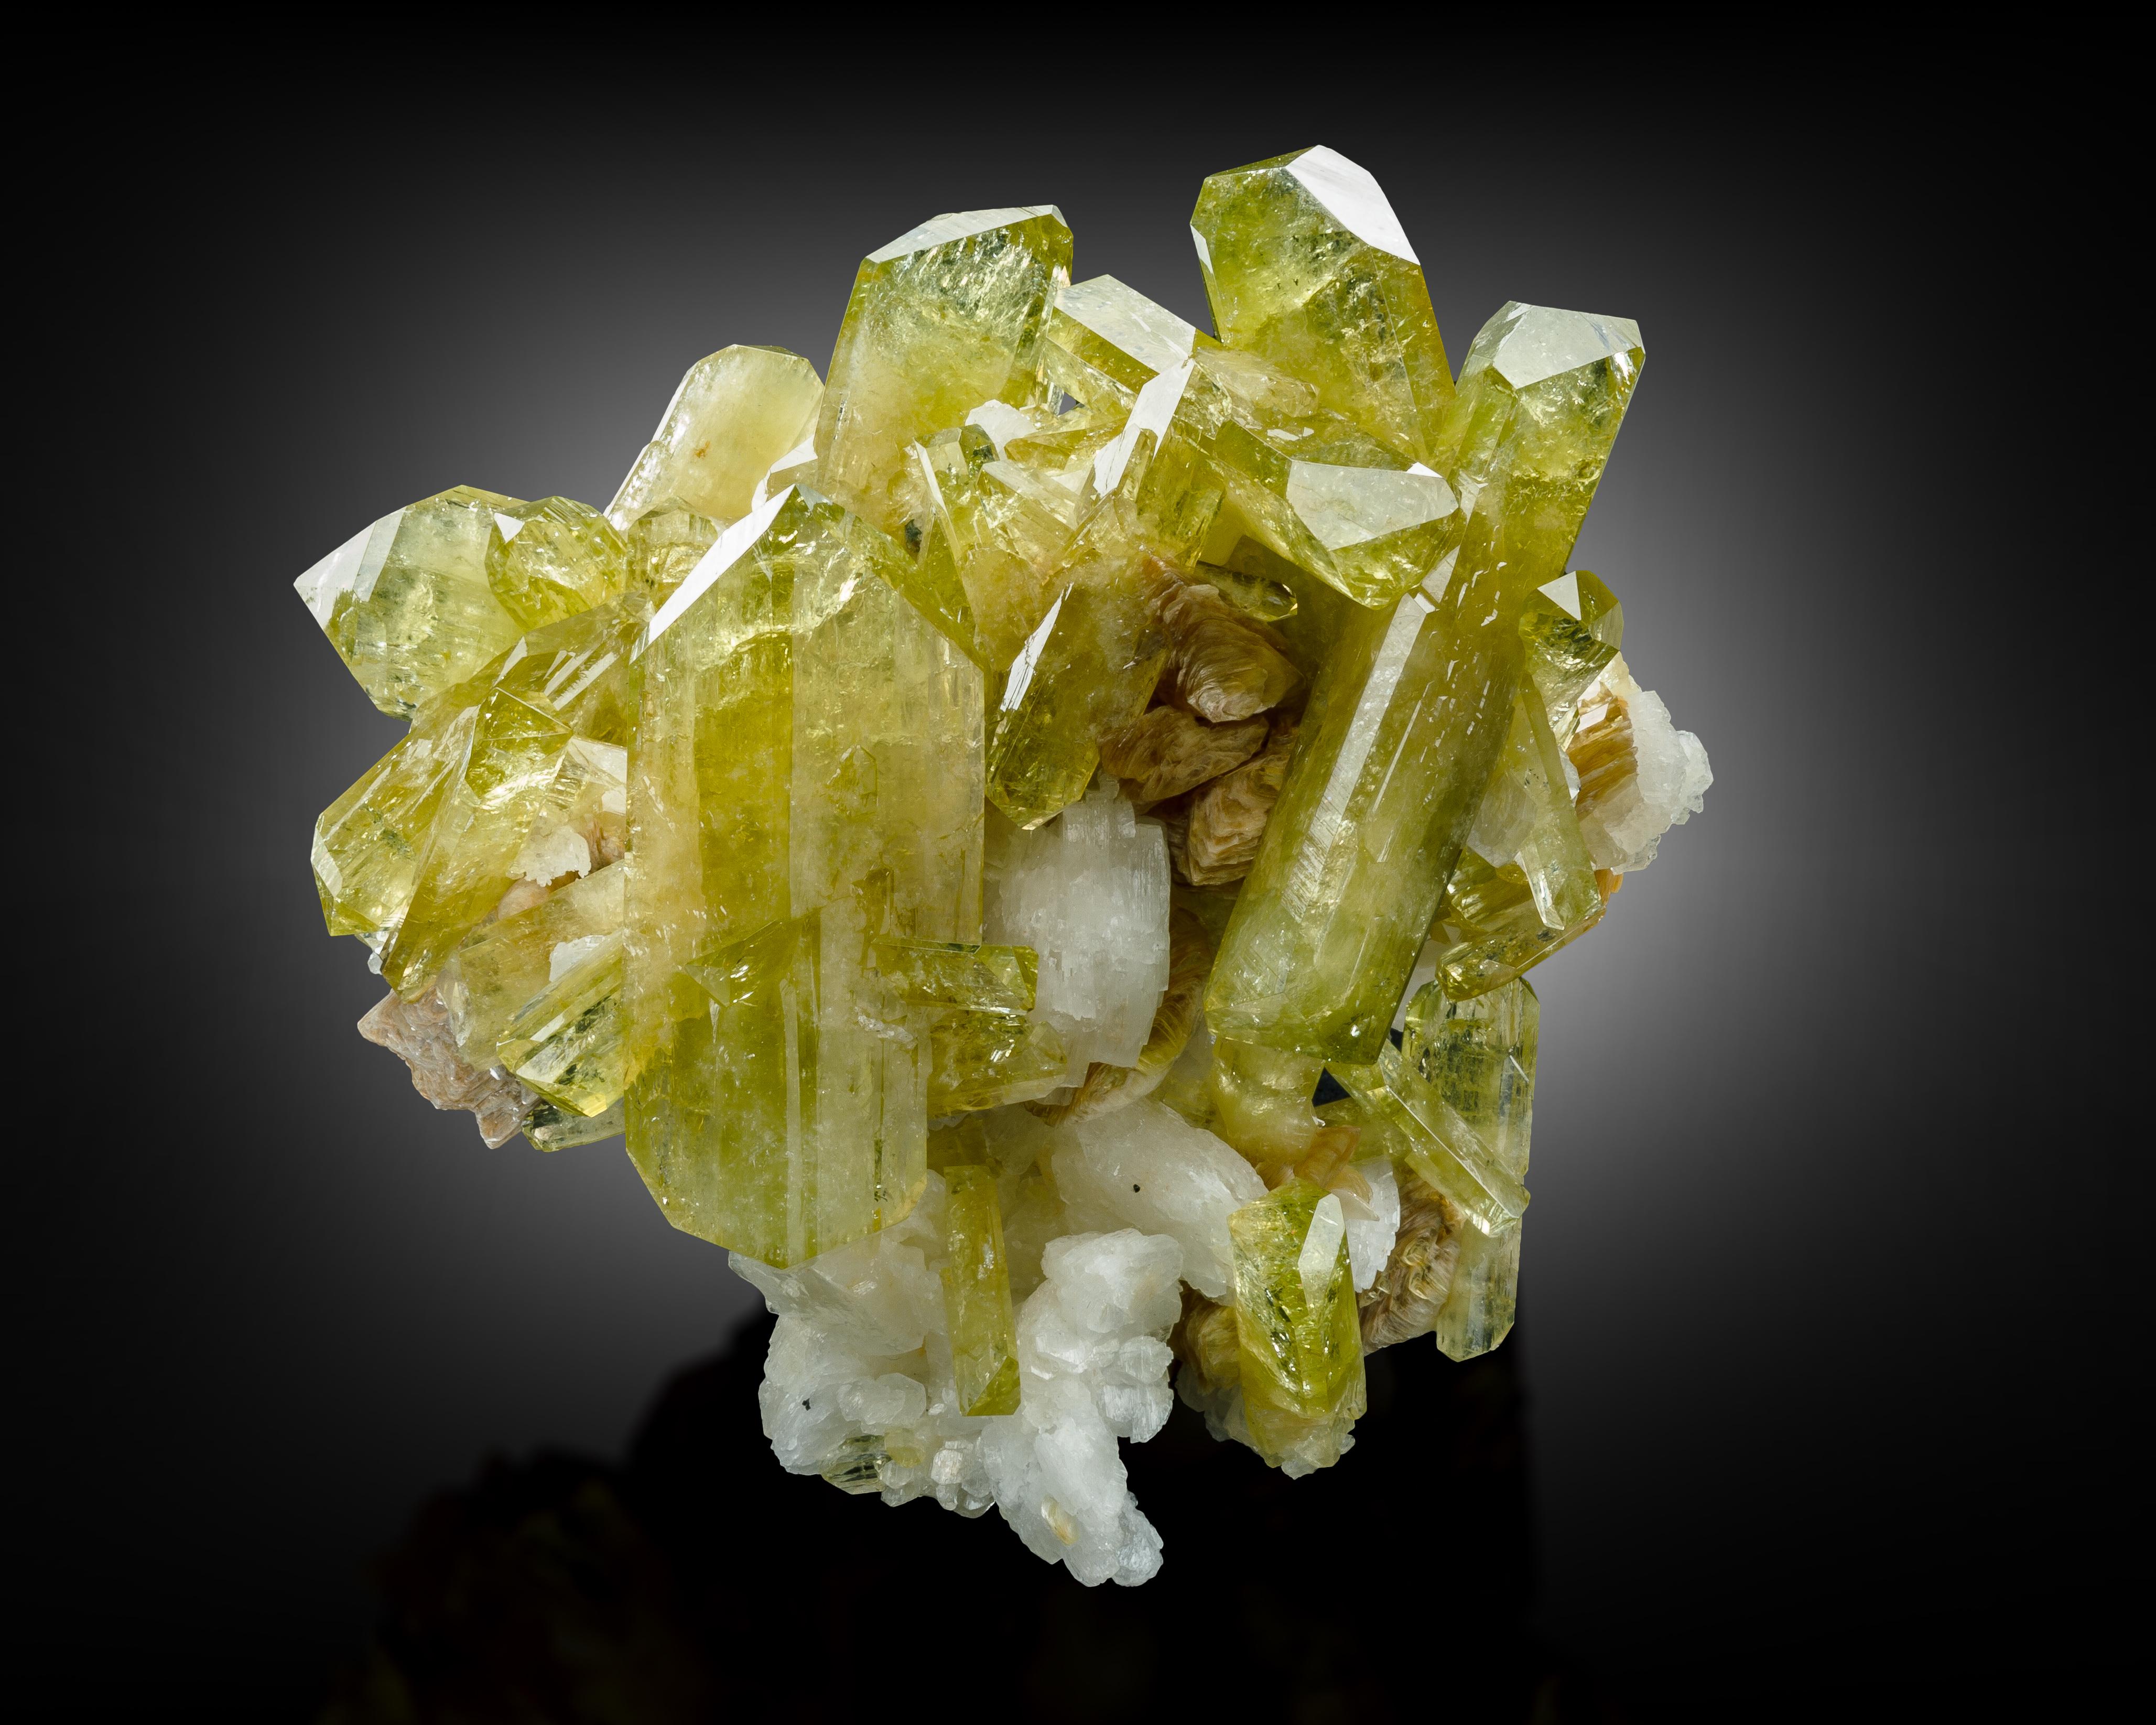 Brazilianite is a phosphate mineral loved for its brilliant color and gemlike crystals. Hues range from light-yellow to electric yellow-green, making it a favorite among specimen collectors and jewelry lovers alike. The average brazilianite specimen